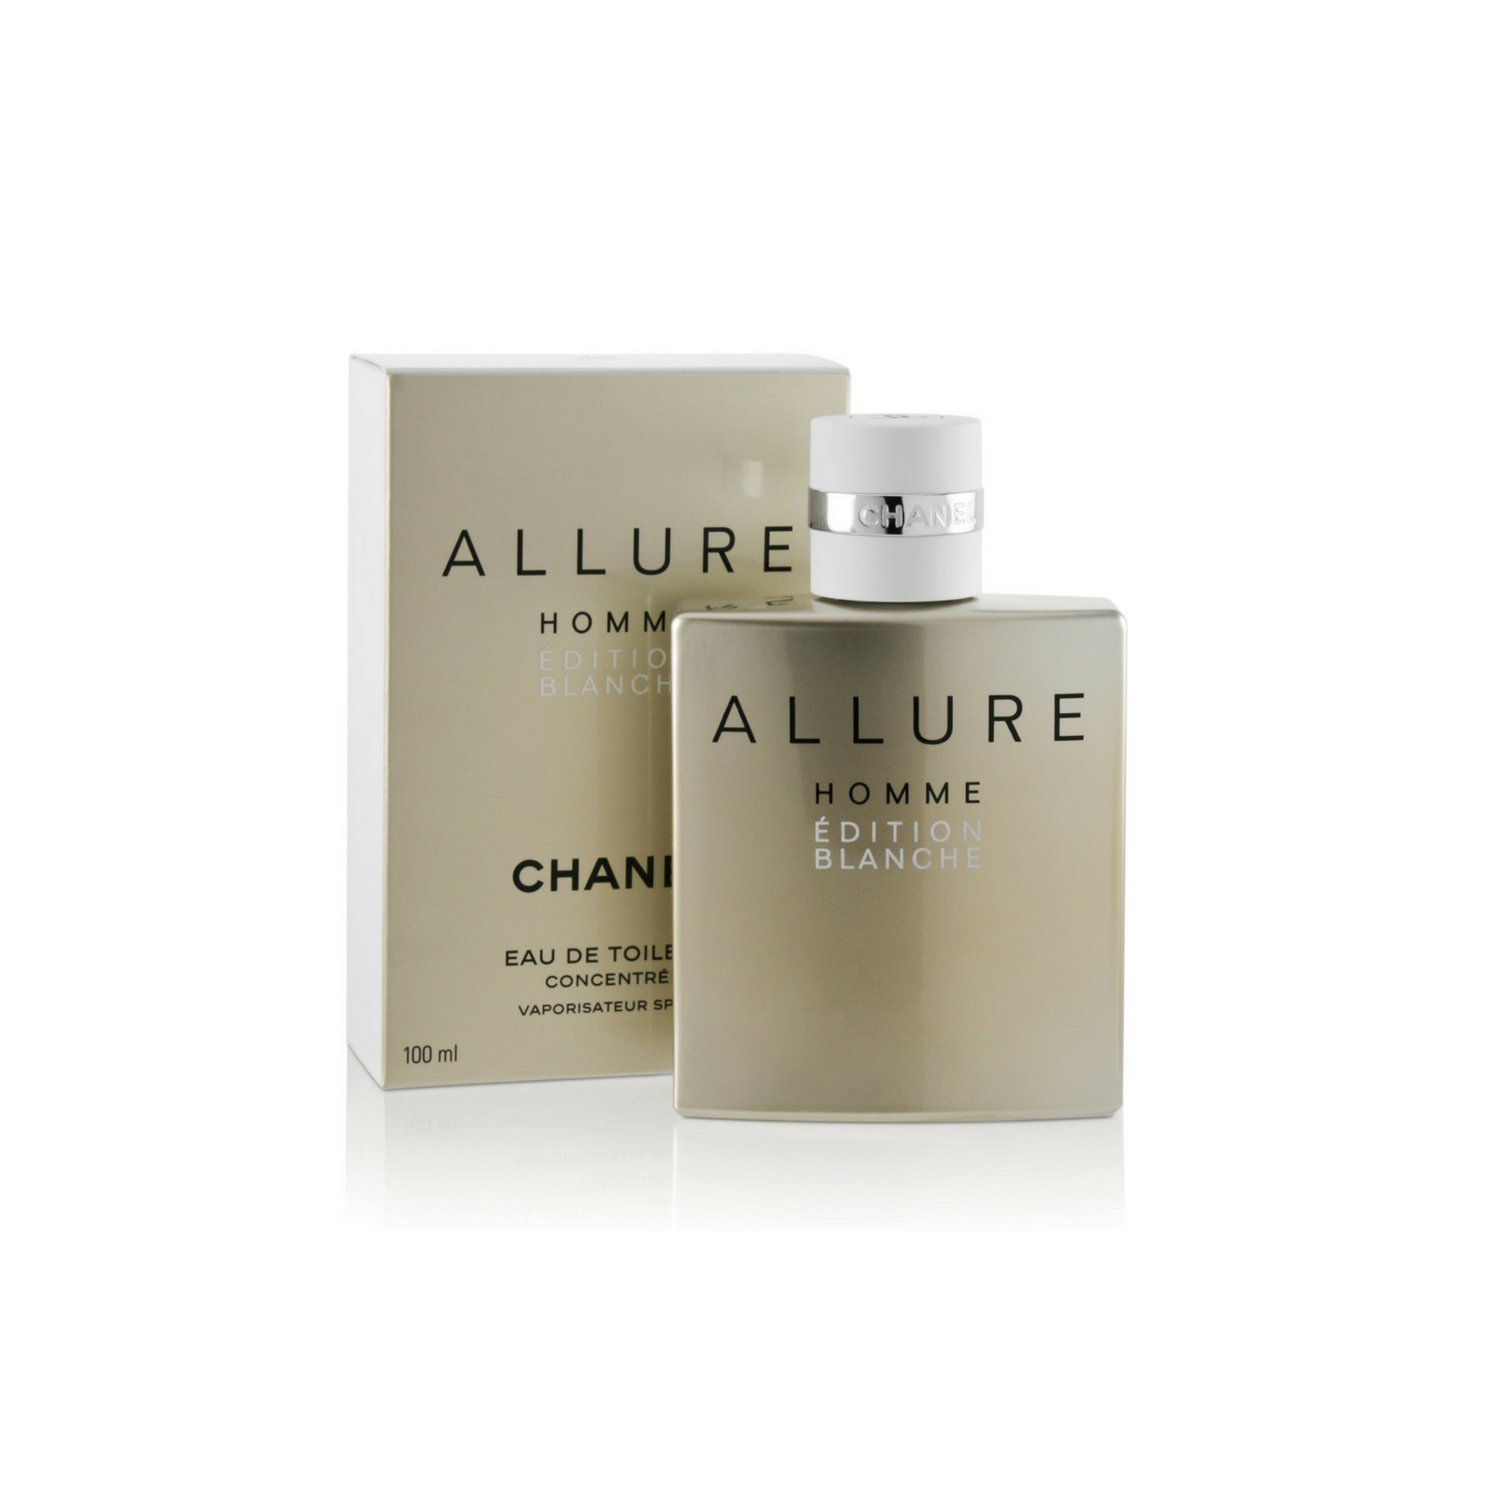 Chanel allure homme blanche. Chanel Allure homme Edition Blanche. Шанель Аллюр Бланш. Chanel мужские. Allure homme Edition Blanche. Chanel Allure homme Edition Blanche парфюмерная вода 100мл.